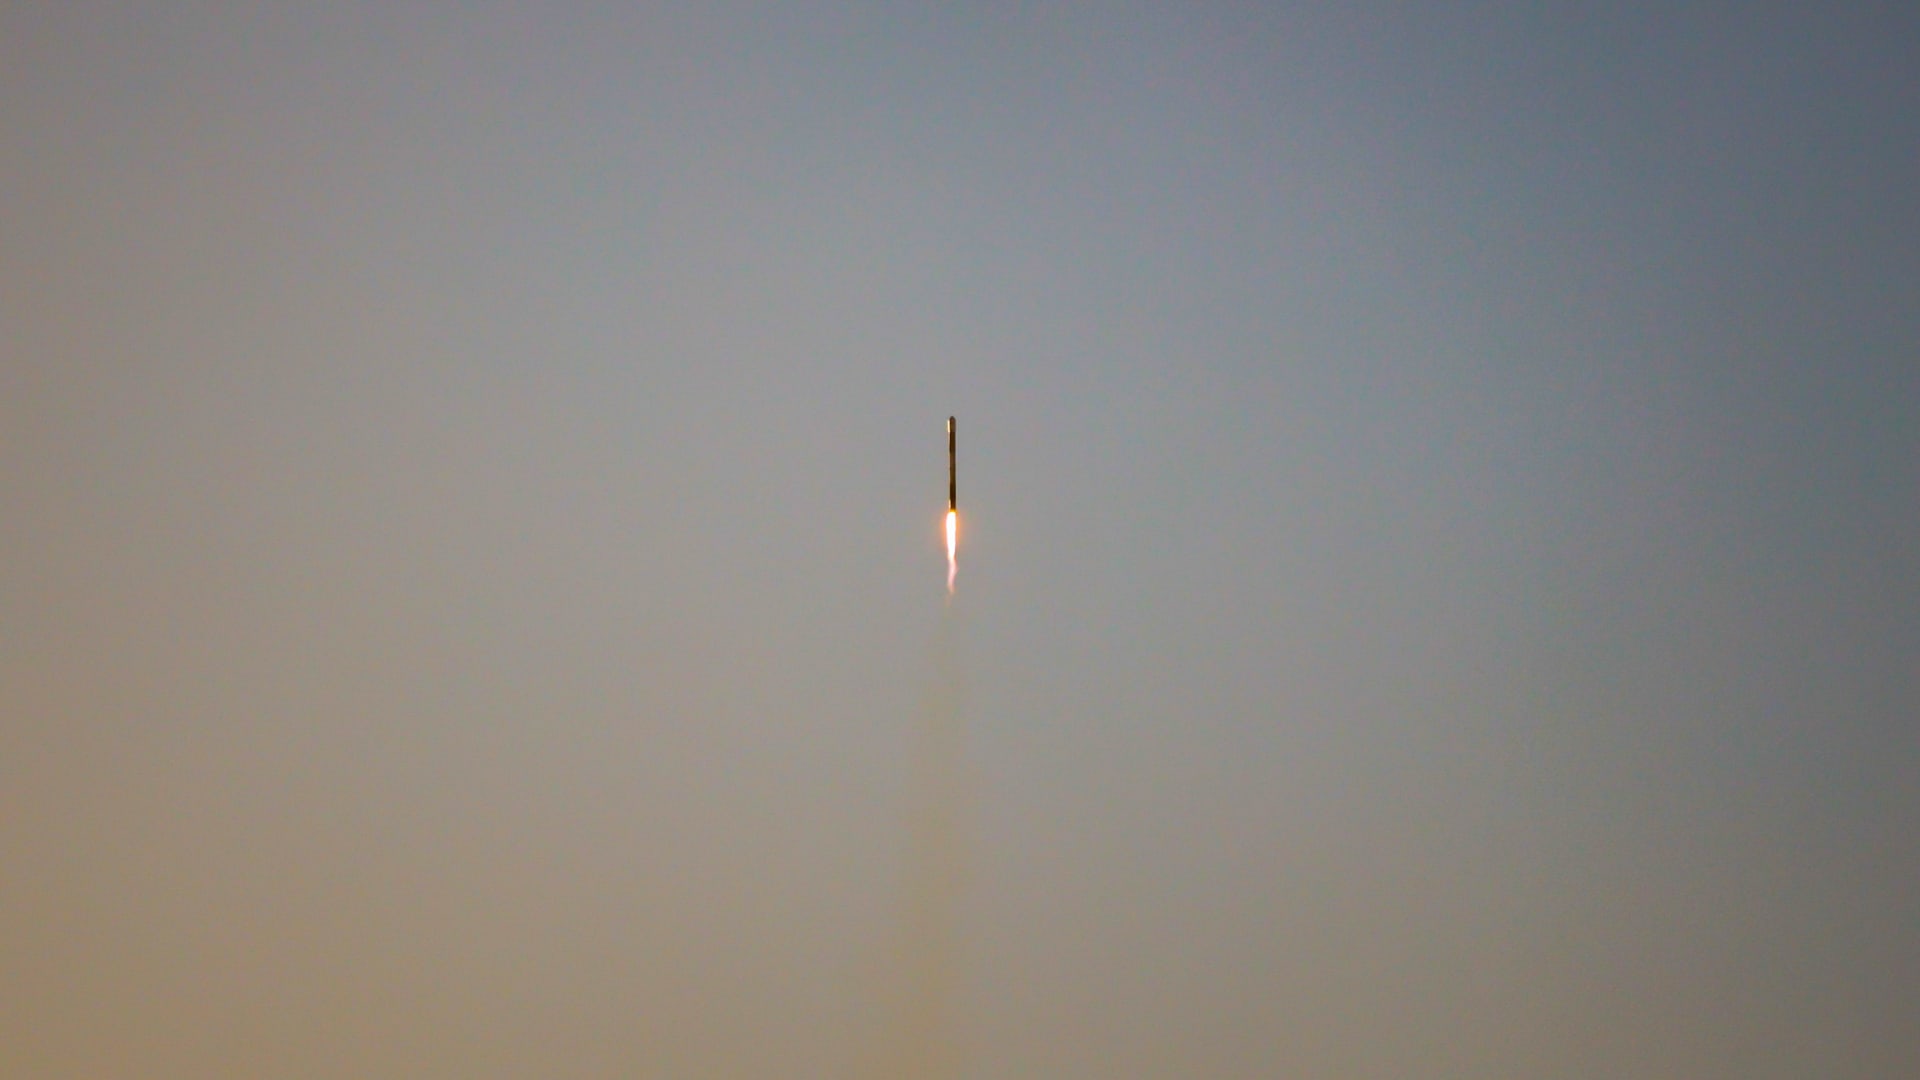 Firefly Aerospace's Alpha rocket lifts off from Vandenberg Space Force Base on September 2, 2021.